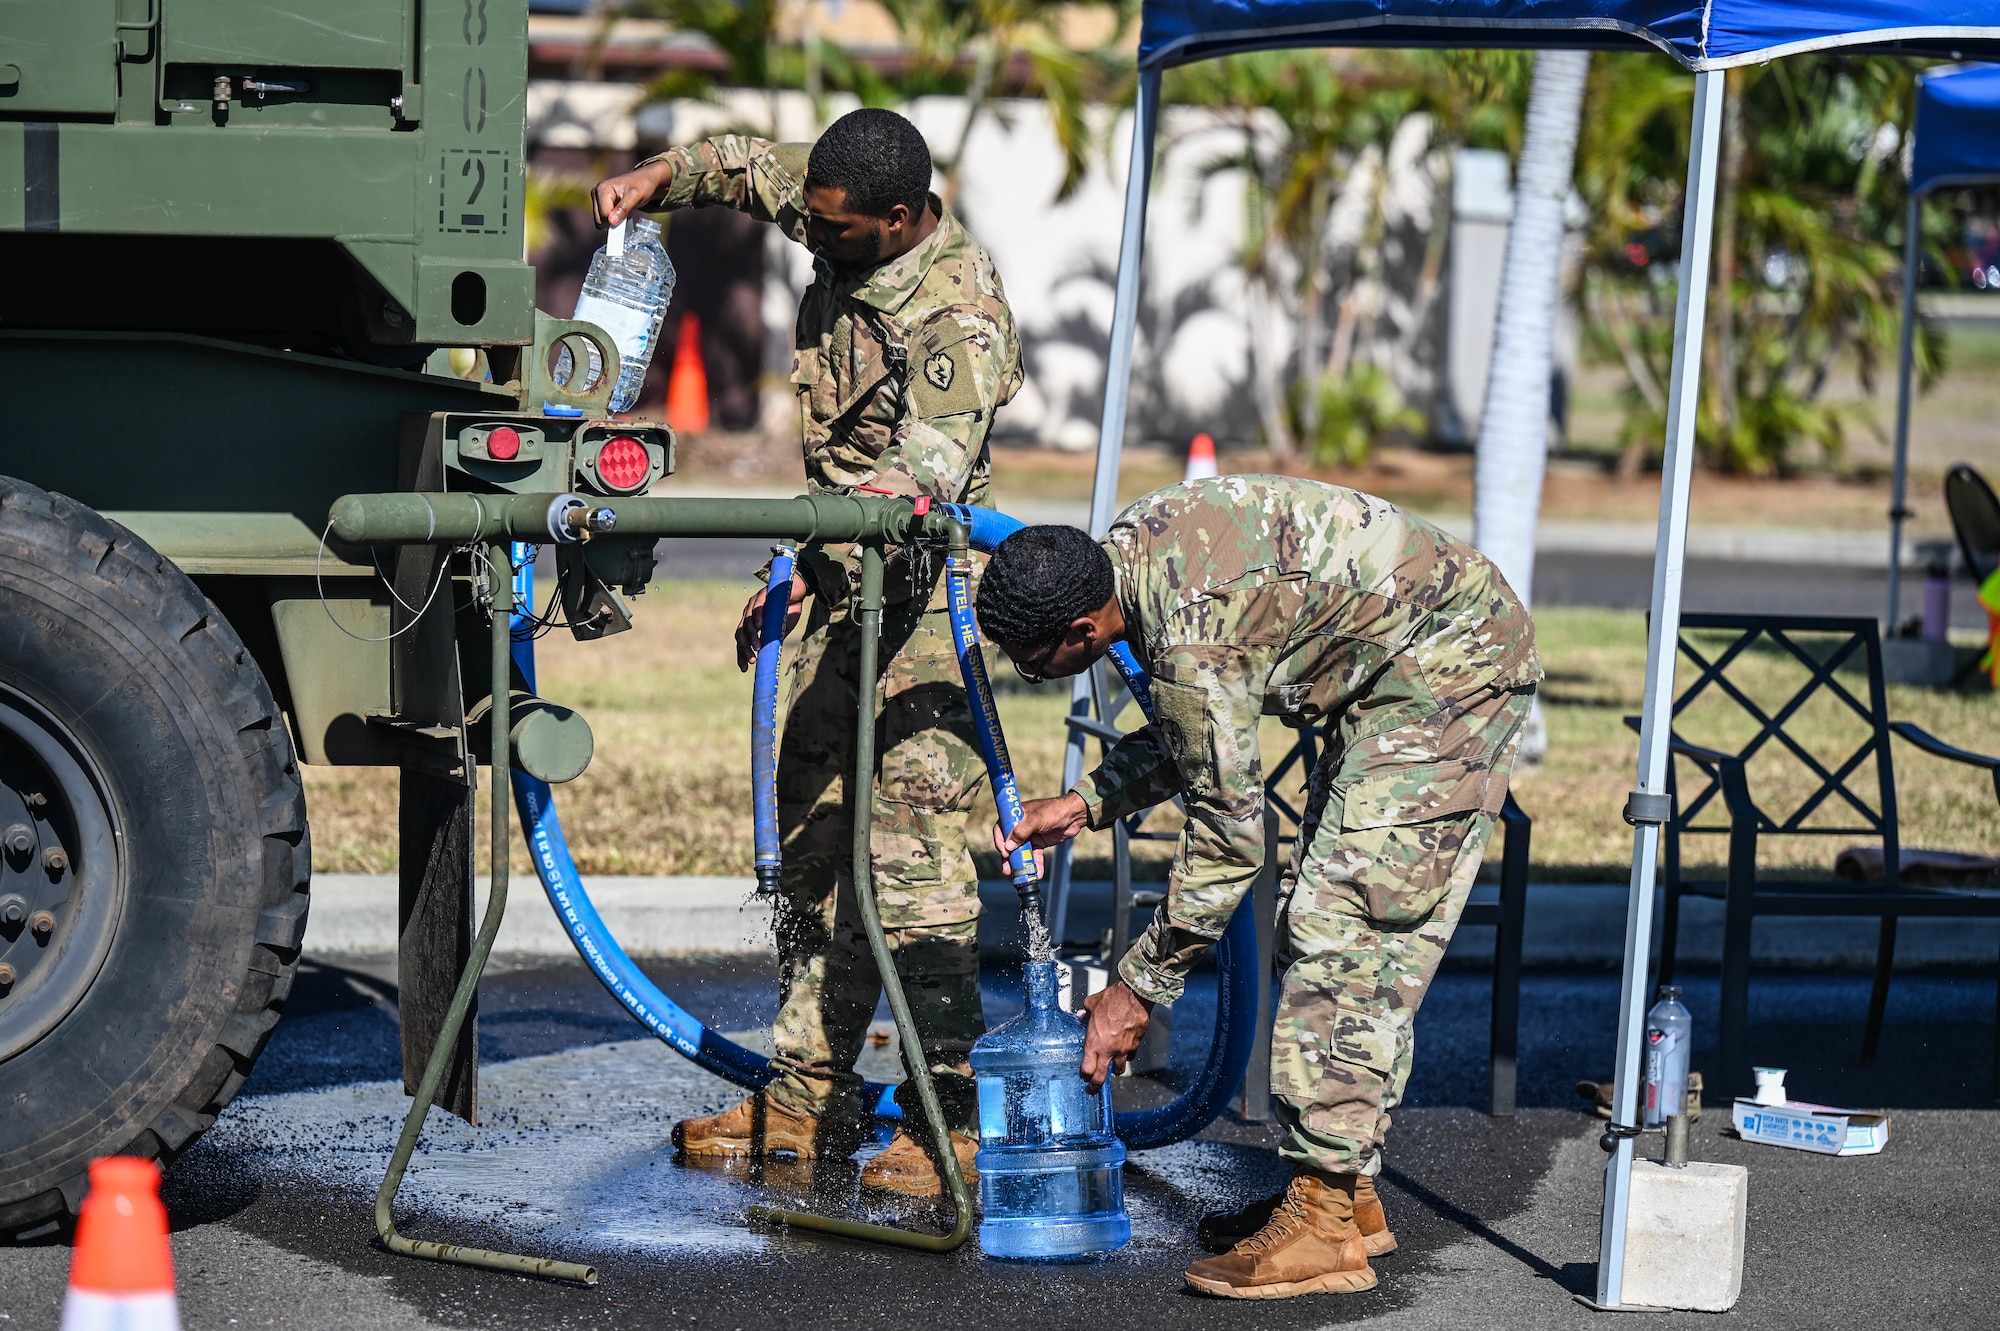 Army Spc. Cartia Carter and Pvt. Darien Forsythe, 524th Division Sustainment Support Battalion petroleum supply specialists, refill containers with water from a 2K Potable Water Module at the Hickam Makai Recreation Center at Joint Base Pearl Harbor-Hickam, Hawaii, Dec. 2, 2021. The Army provided a 24-hour service, refilling reusable water containers for affected personnel. (U.S. Air Force photo by Staff Sgt. Alan Ricker)